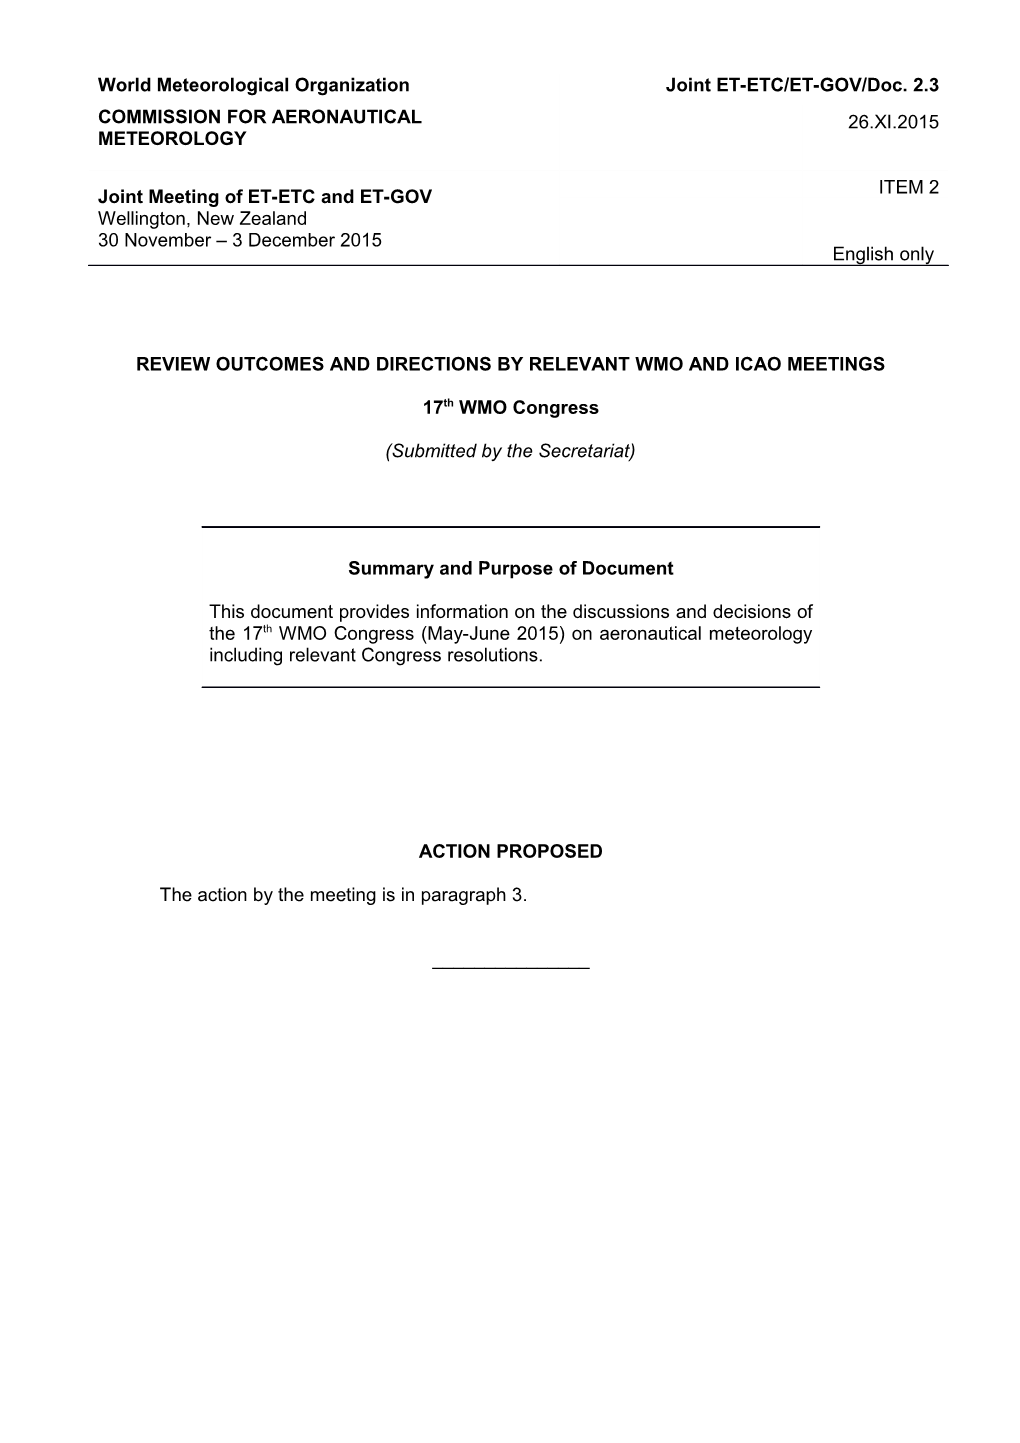 Review Outcomes and Directions by Relevant Wmo and Icao Meetings